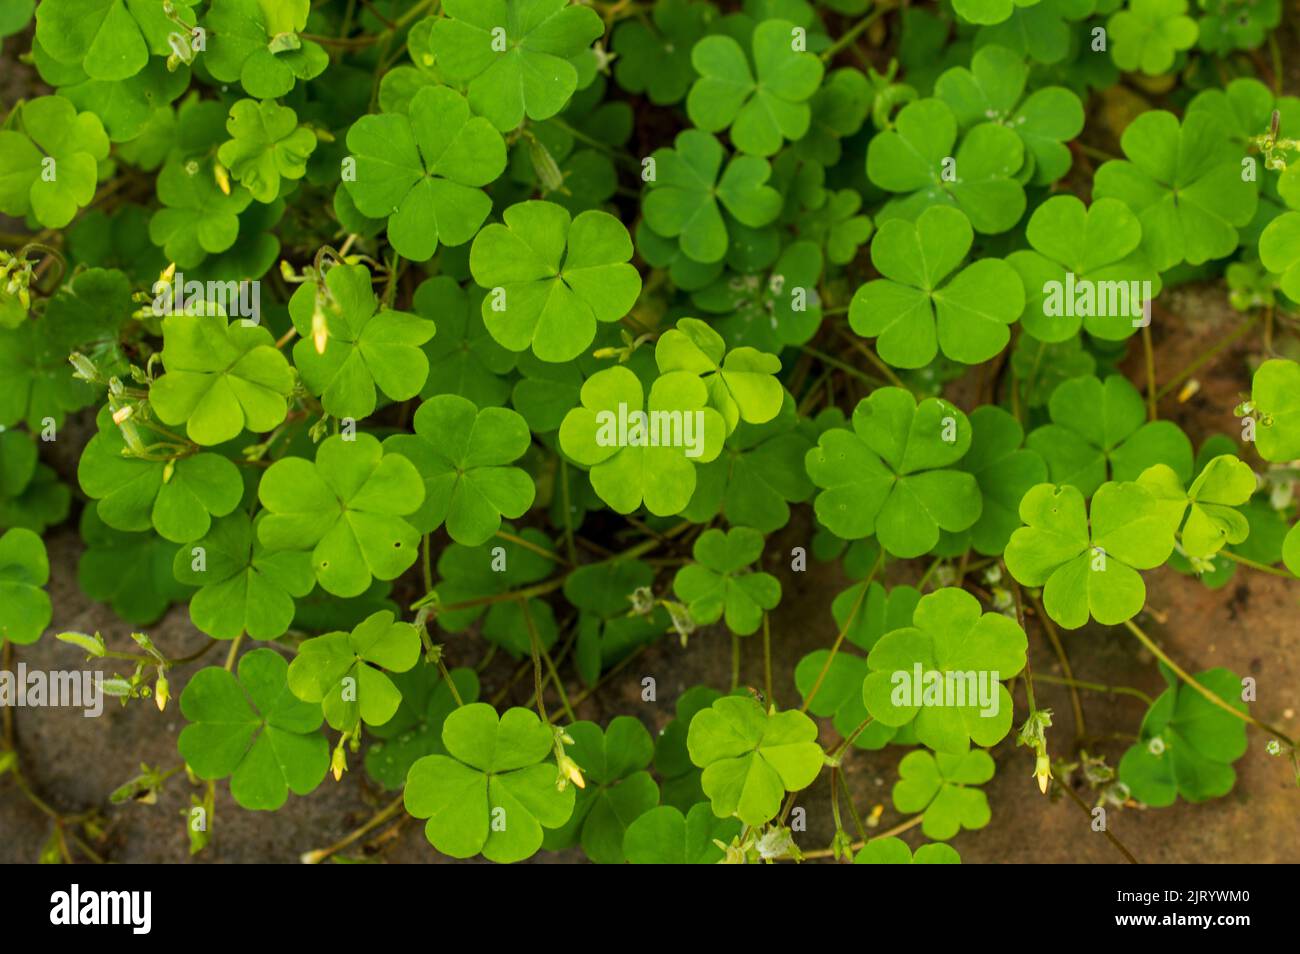 Yellow wood sorrel is a medium sized creeping herb weed also known as sour grass because its leaves have a mildly sour taste. It is used topically Stock Photo